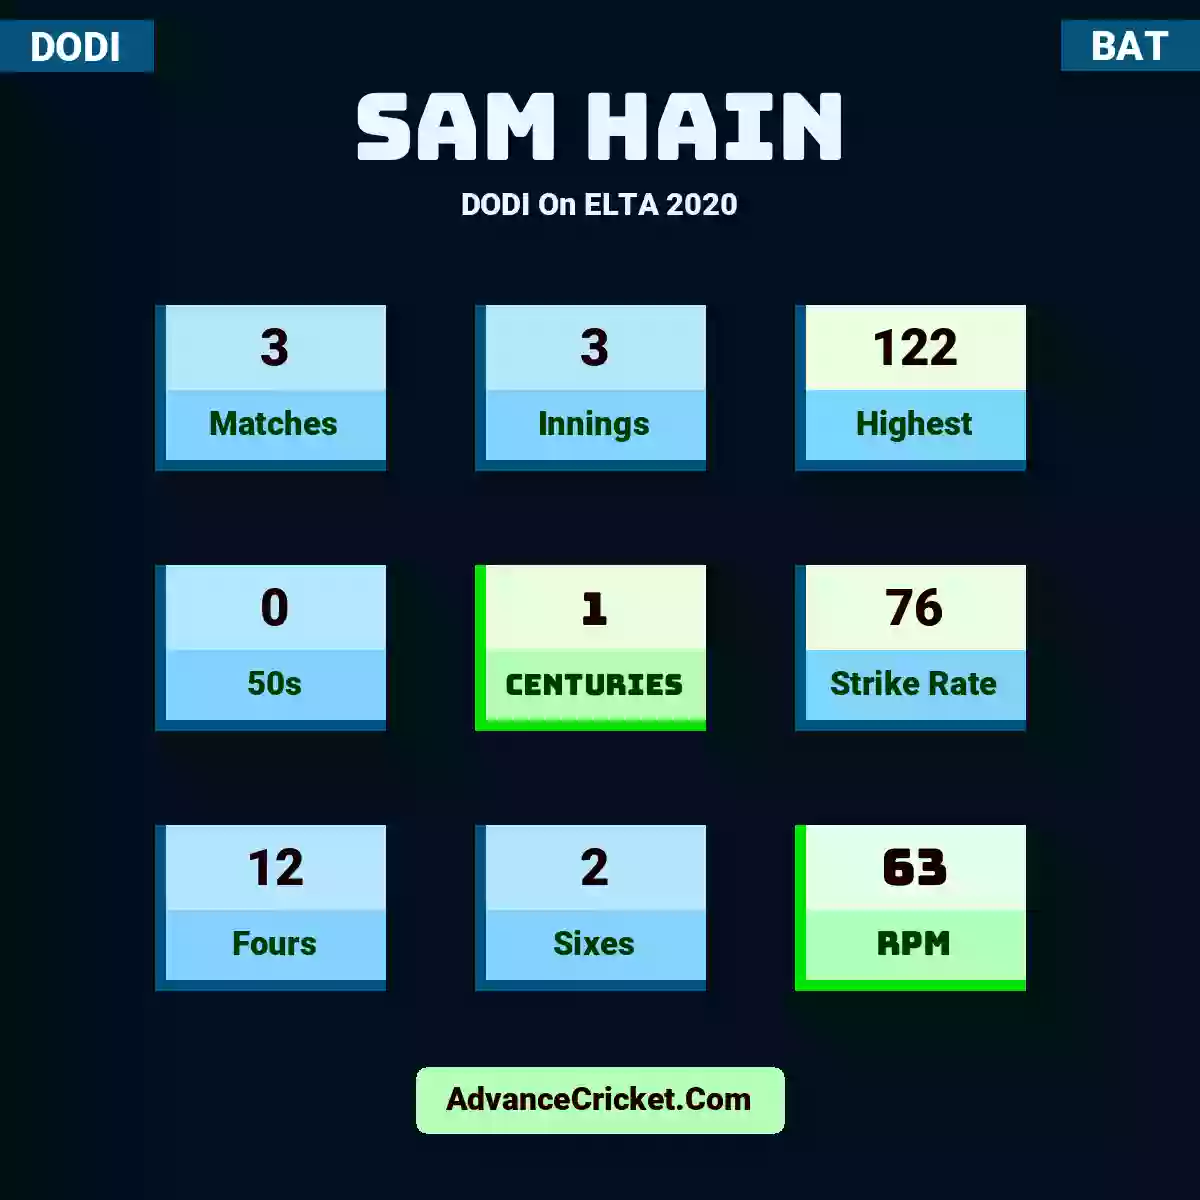 Sam Hain DODI  On ELTA 2020, Sam Hain played 3 matches, scored 122 runs as highest, 0 half-centuries, and 1 centuries, with a strike rate of 76. S.Hain hit 12 fours and 2 sixes, with an RPM of 63.